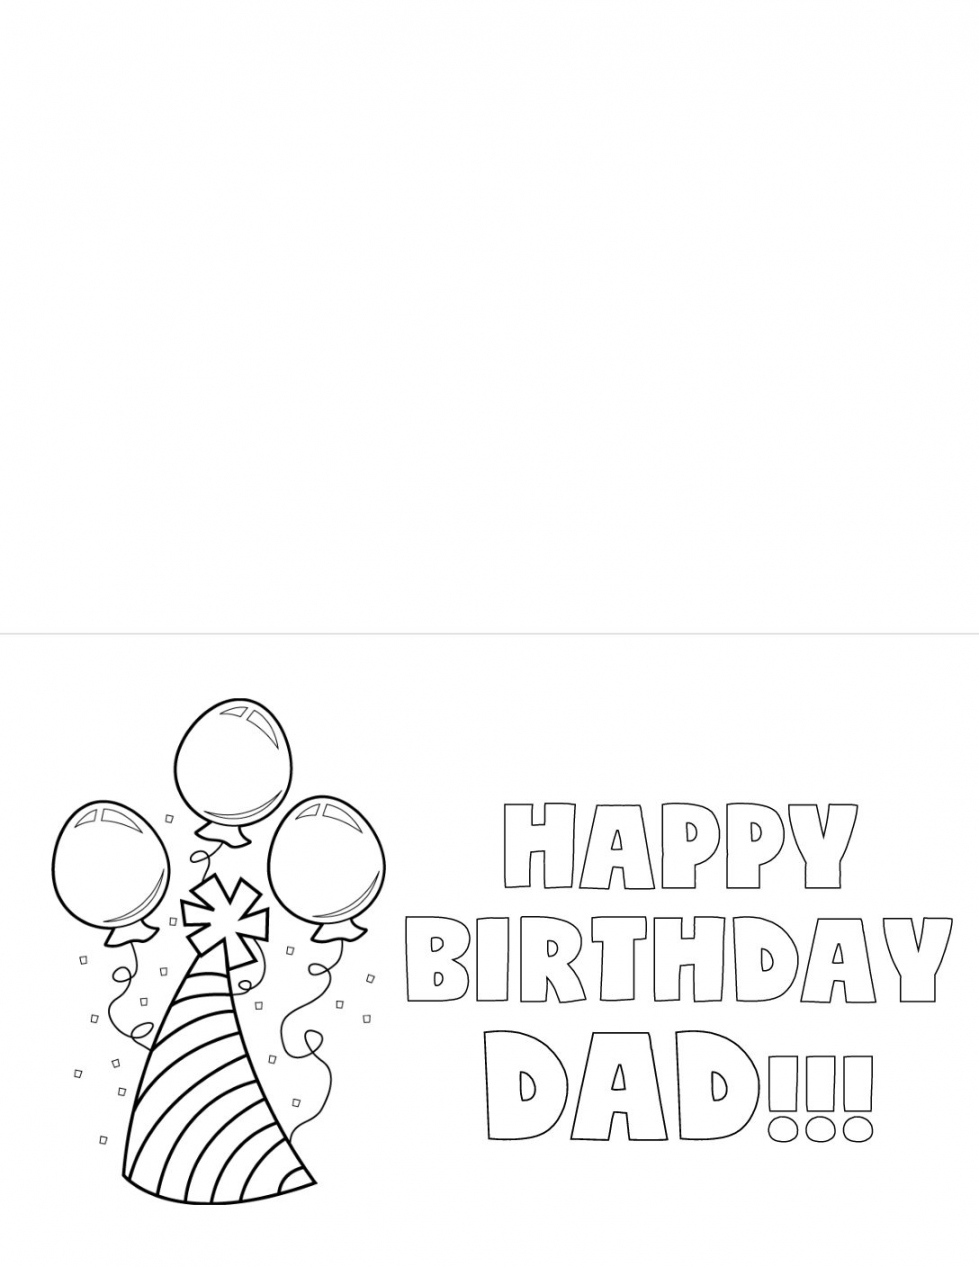 Free Printable Birthday Card (Dad) - Six Clever Sisters - FREE Printables - Free Printable Birthday Cards For Dad